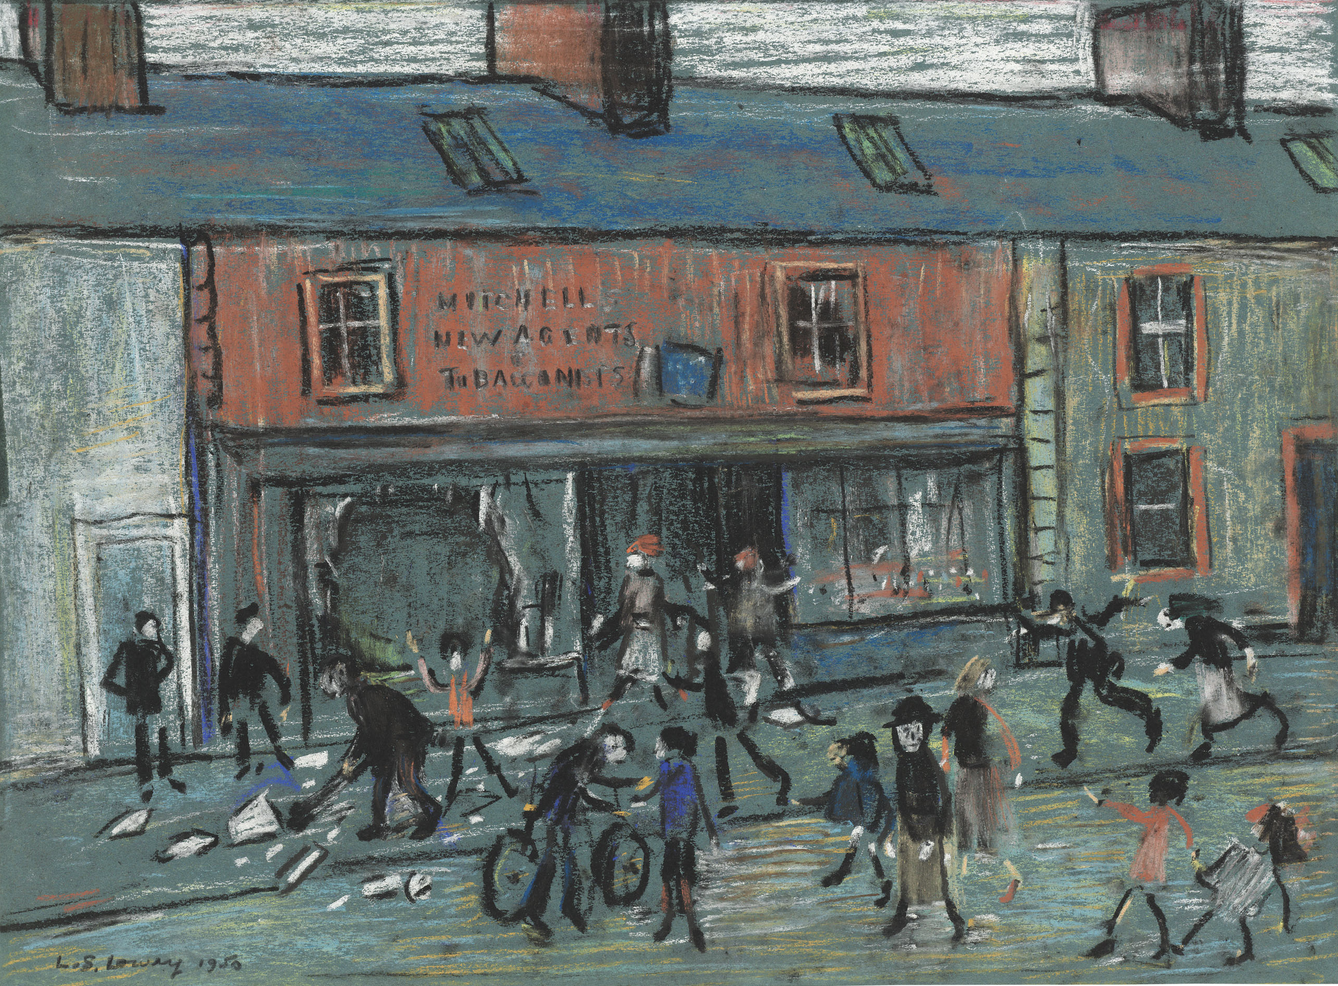 The Broken Shop Window at Cleator Moor (1950) by Laurence Stephen Lowry (1887 - 1976), English artist.